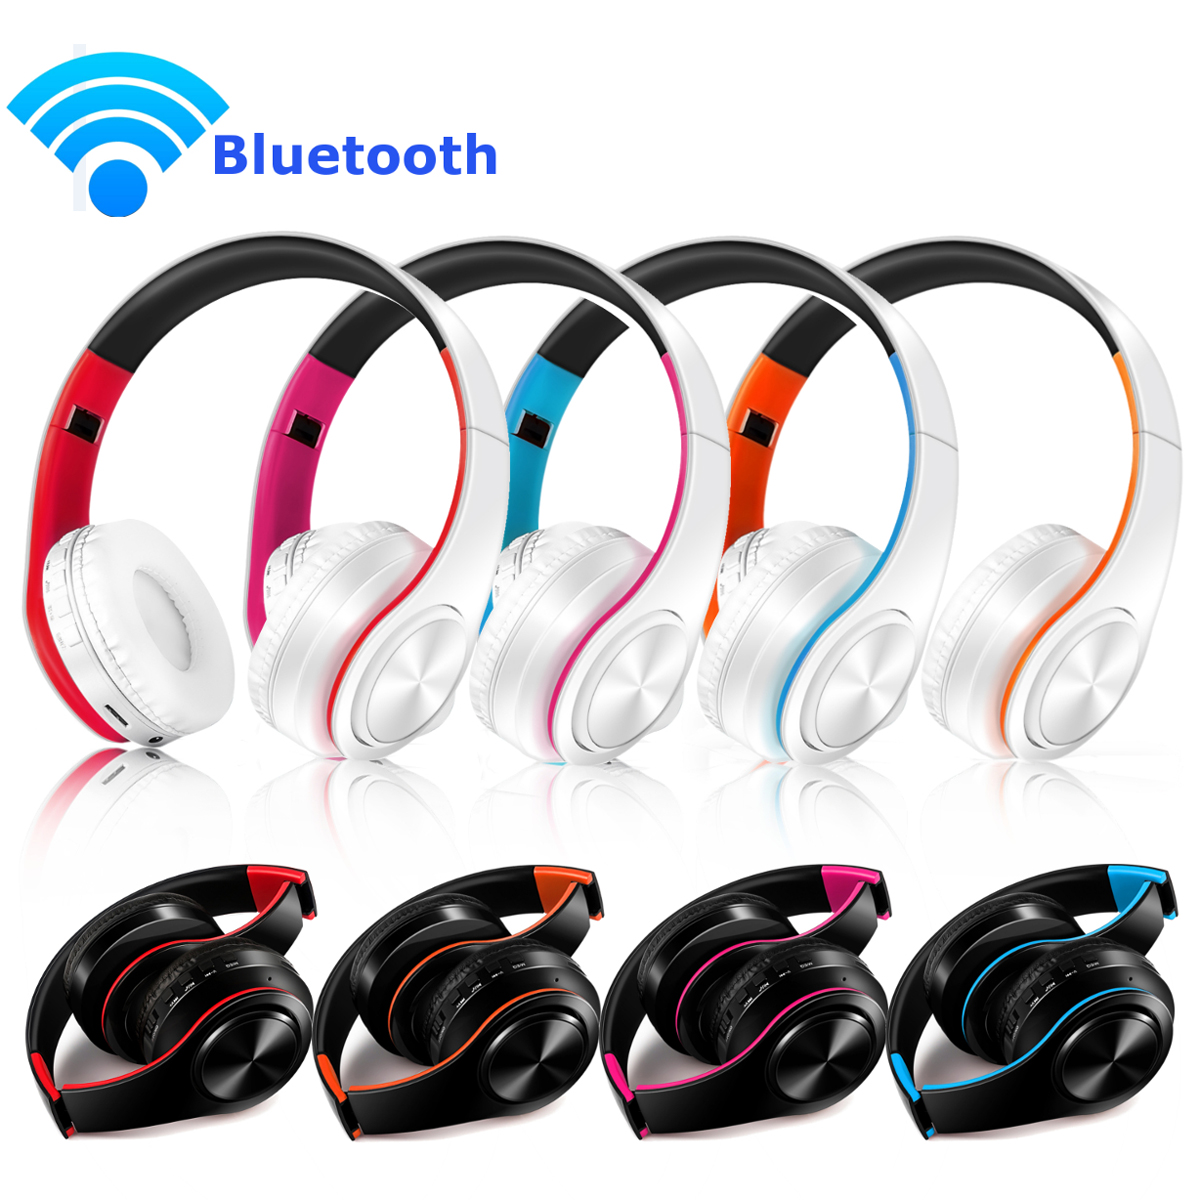 Foldable Colorfoul Bluetooth 4.0 Wireless Stereo Headphone with MIC 12